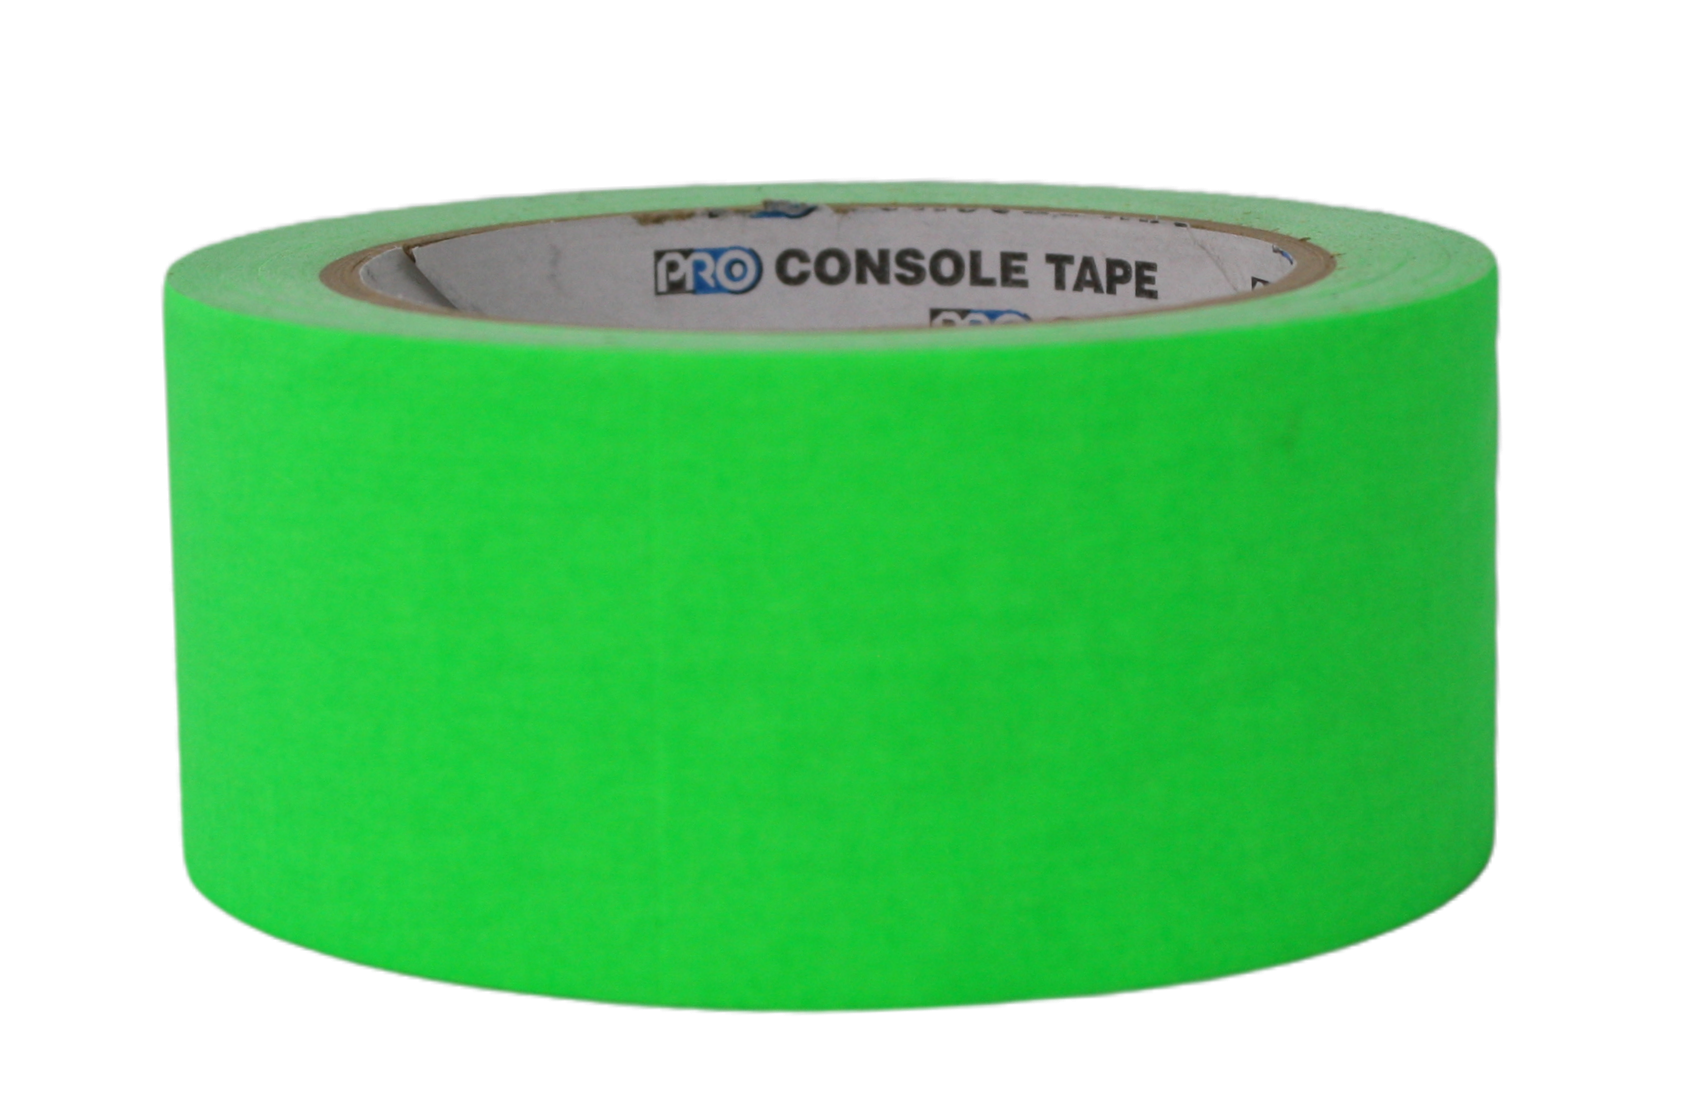 Pro Console Tape, 2" Fluorescent Green, front view